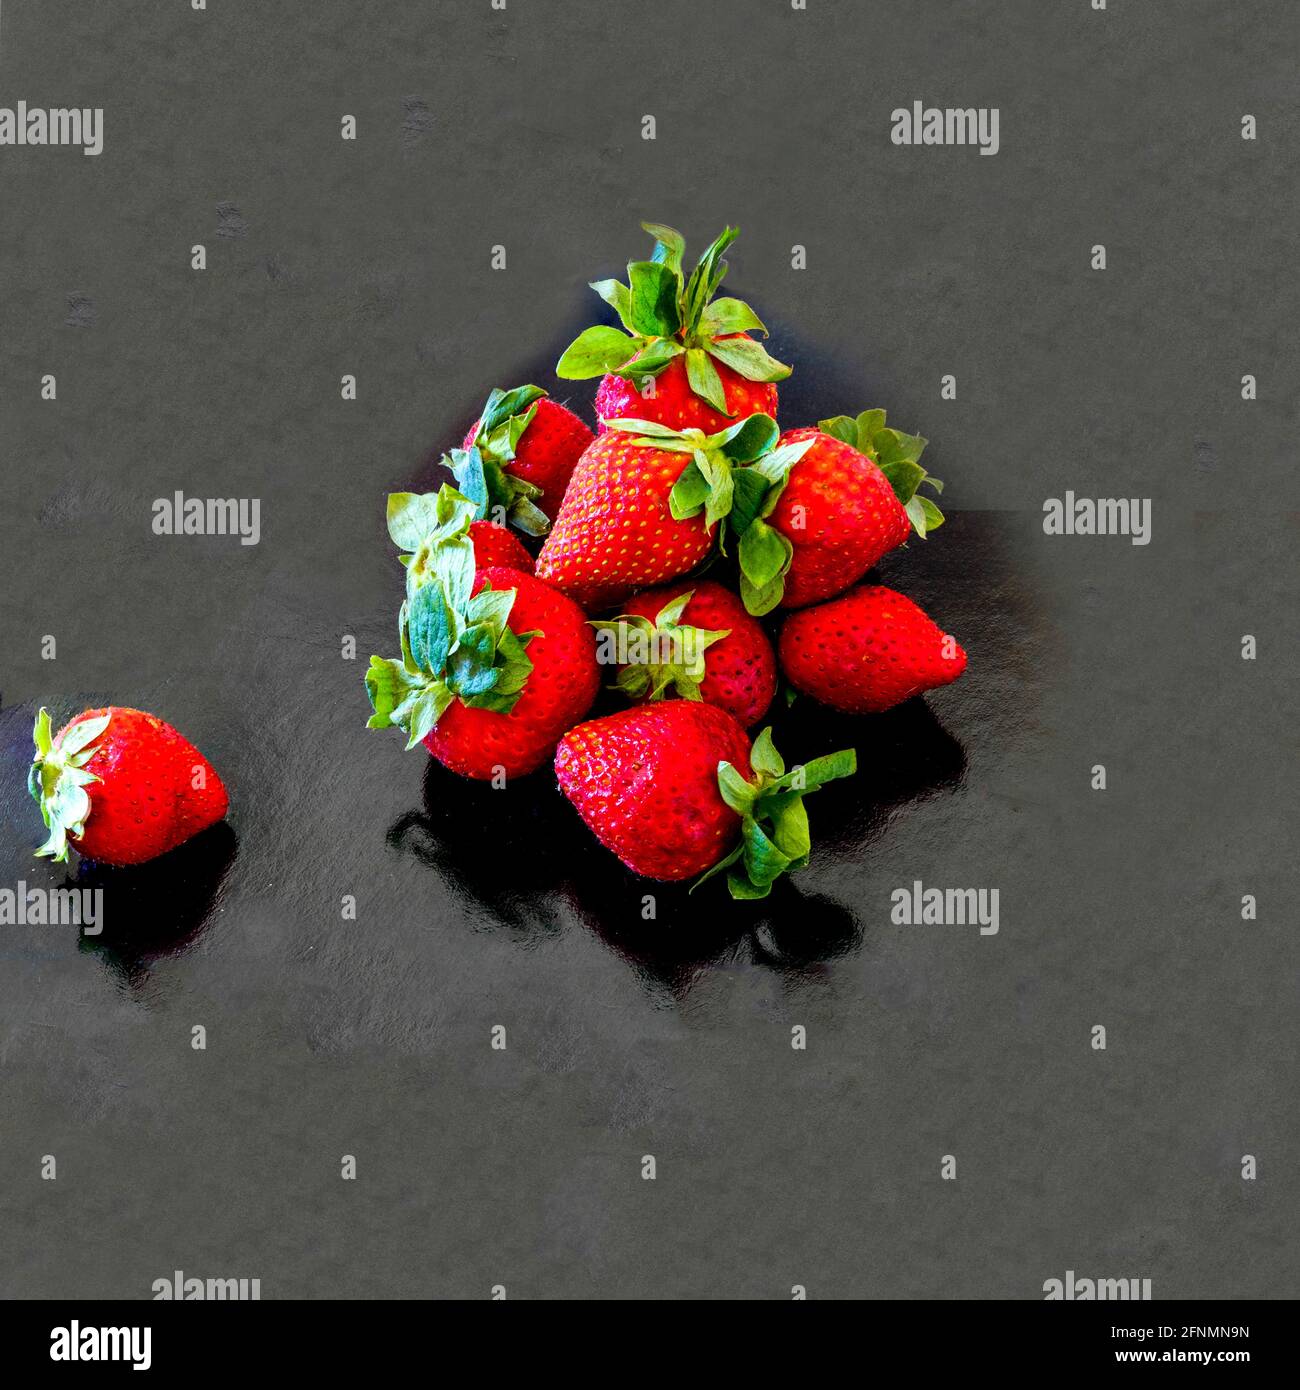 Strawberries Isolated.  Bright red strawberries on a black background. Stock Image. Stock Photo